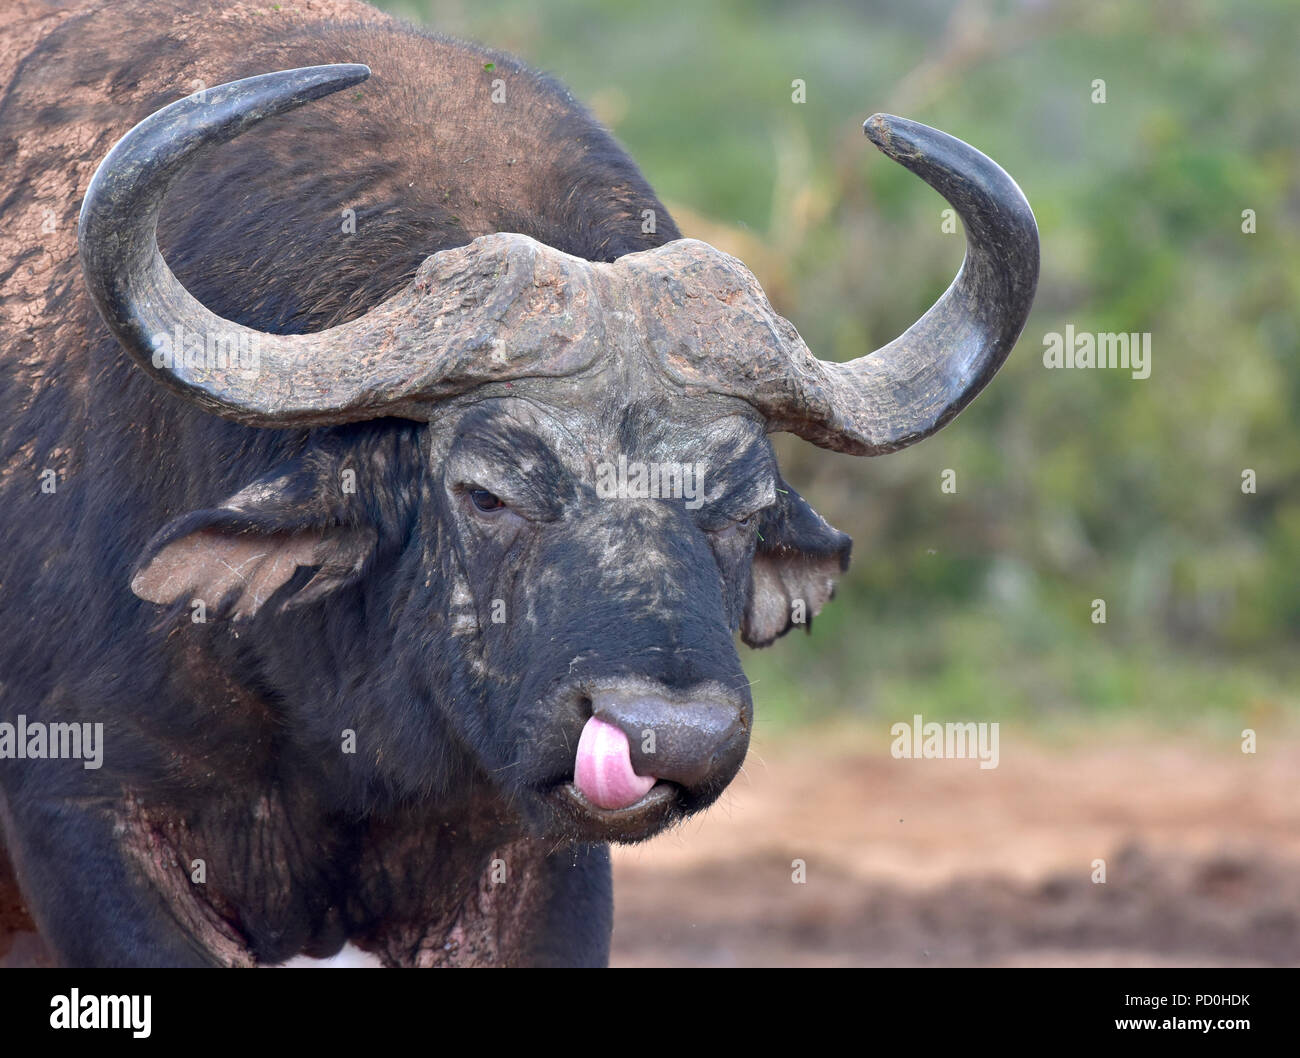 South Africa, a fantastic travel destination to experience third and first world together. Buffalo bull licking nostrils clean with its tongue. Stock Photo